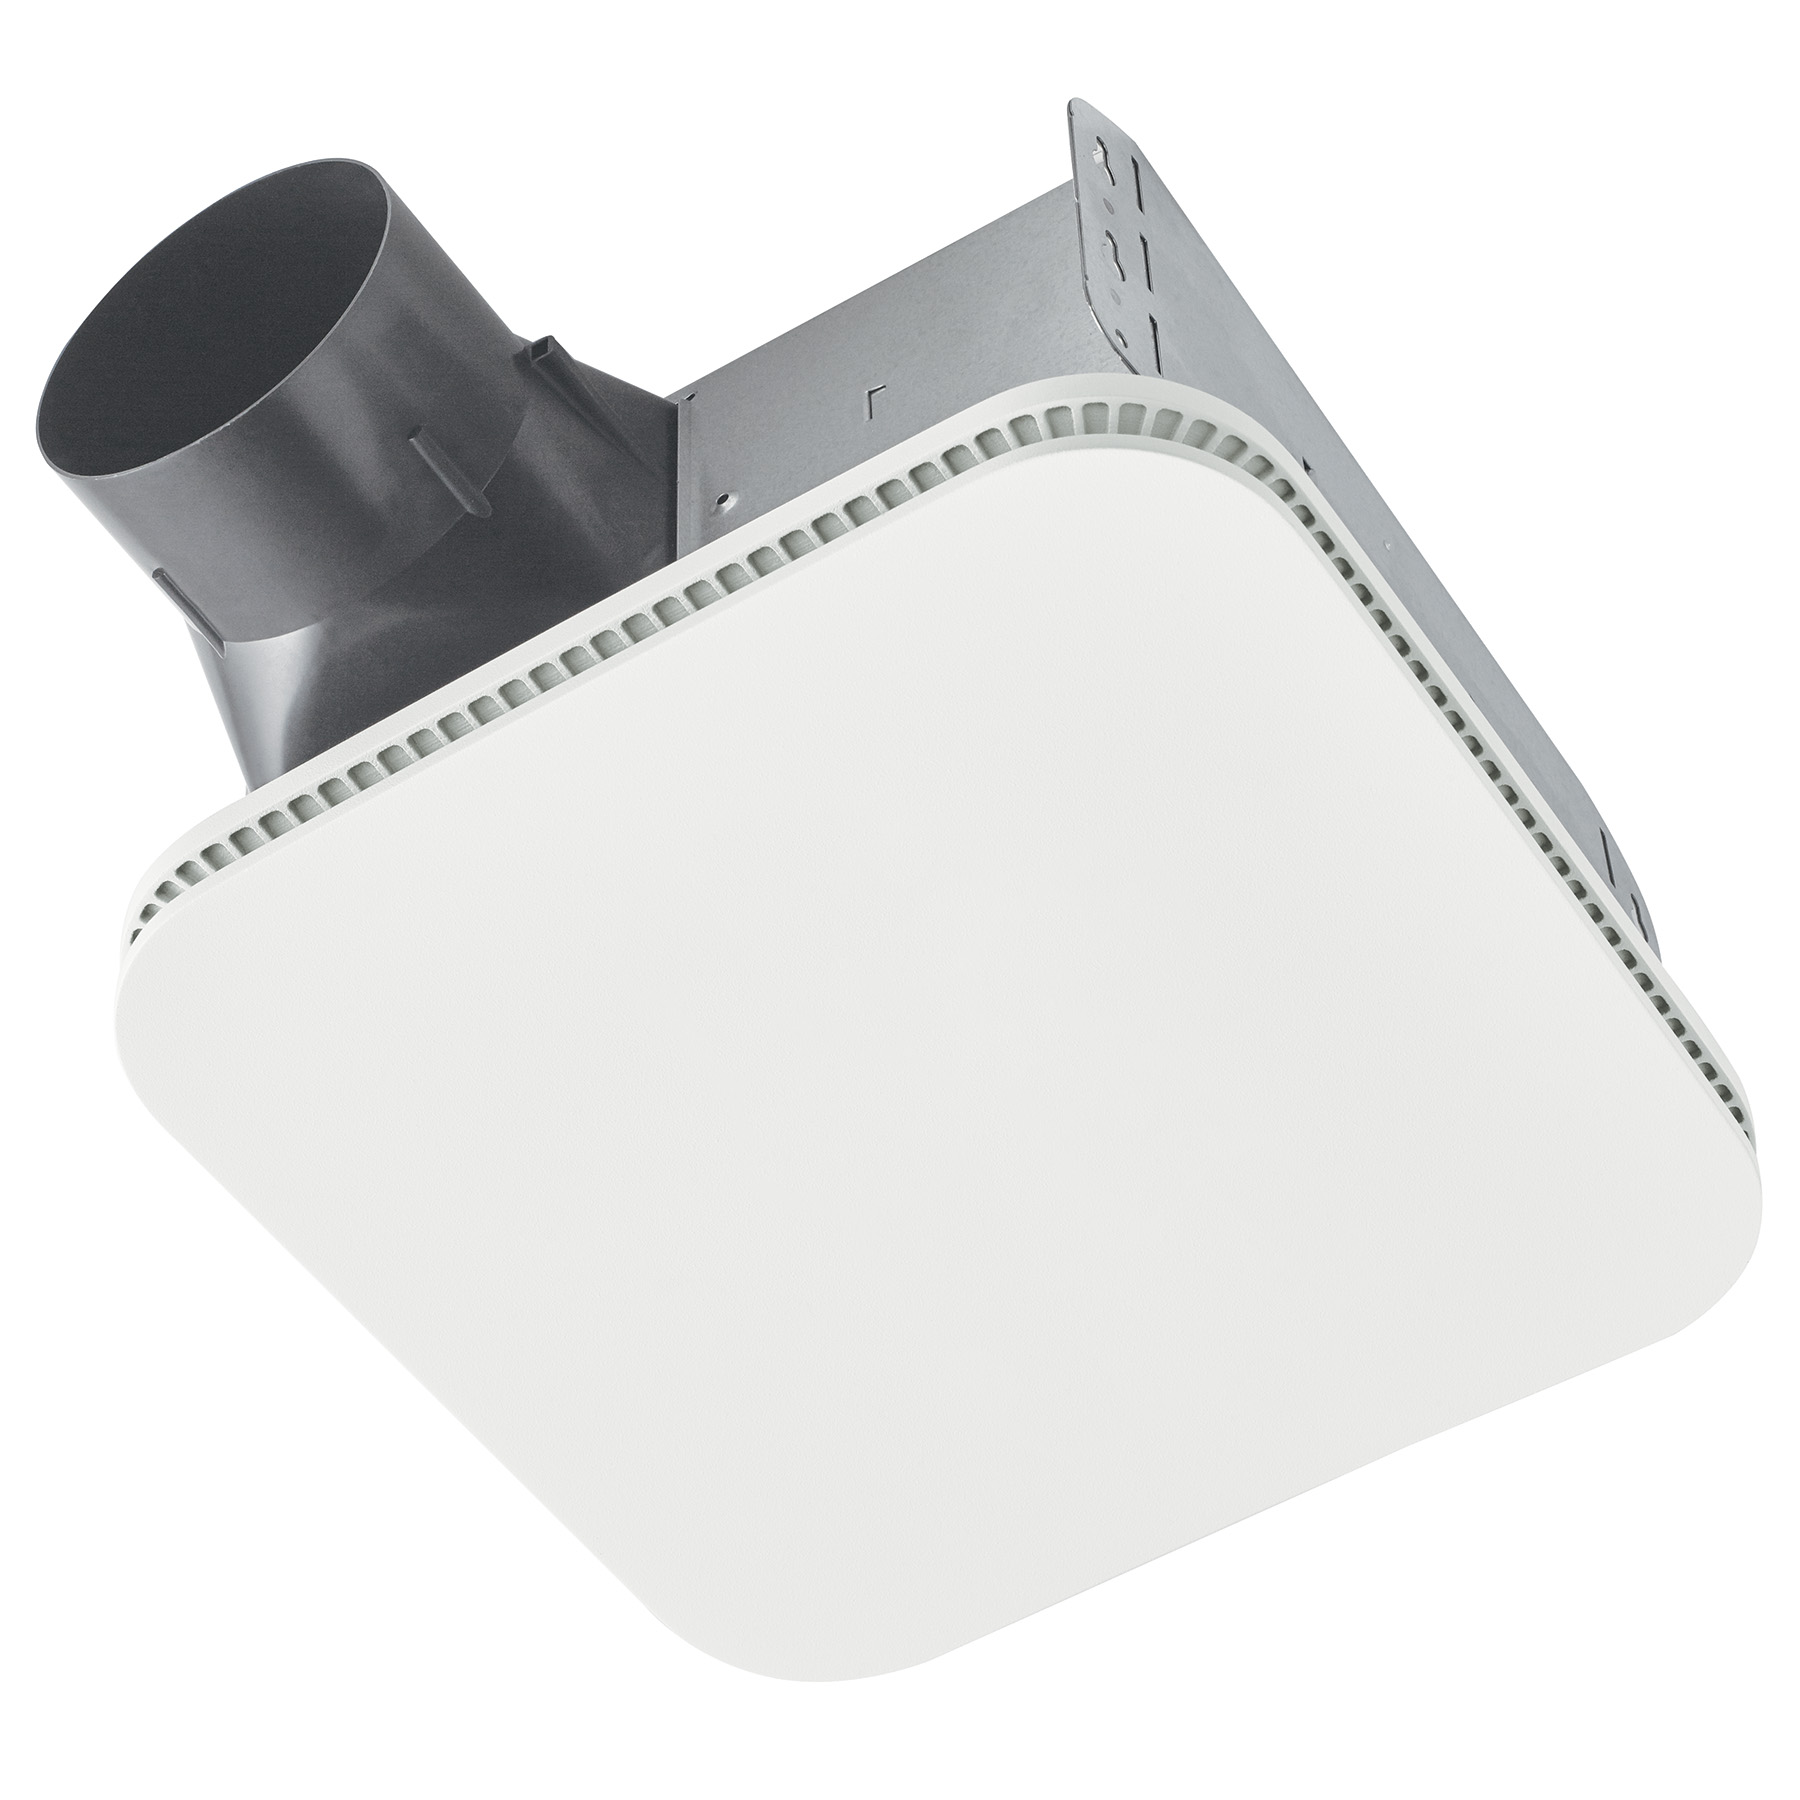 NUTO AE110K FLEX SERIES 110 CFM CEILING BATHROOM EXHAUST FAN WITH CLEANCOVER GRILLE, ENERGY STAR CERTIFIED